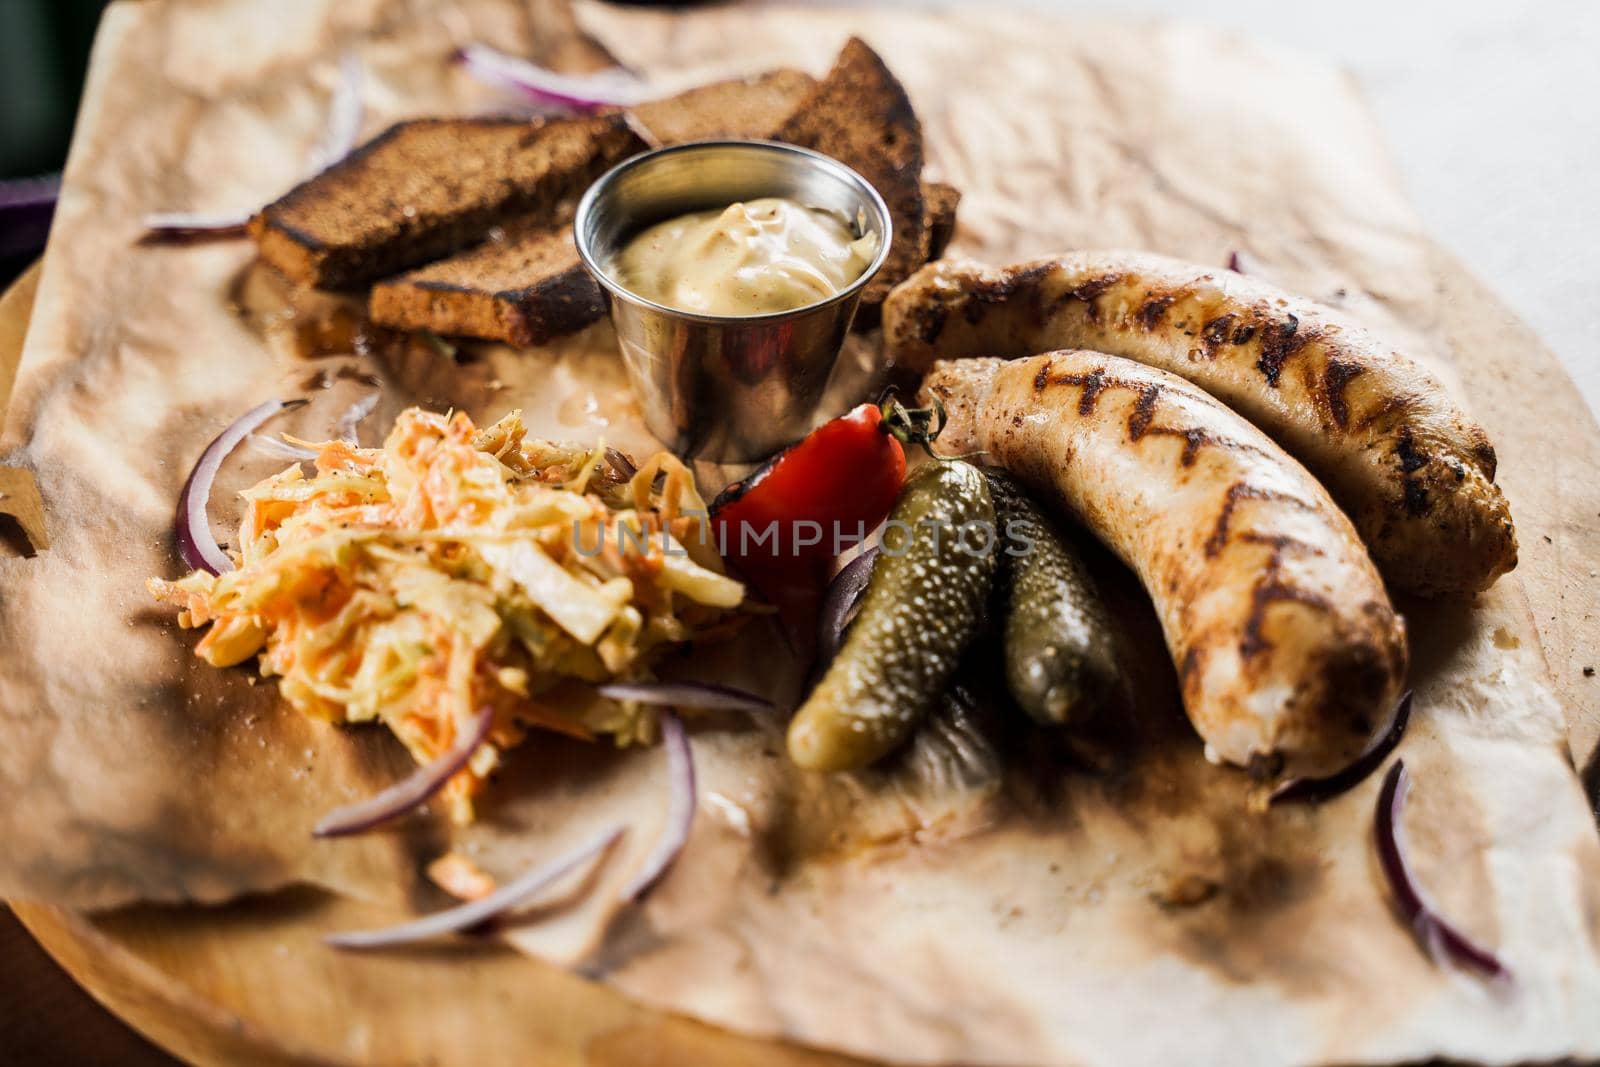 Grilled sausages with beer and vegetables with pickled cucumber, cabbage salad sauce and bread on parchment, top view.